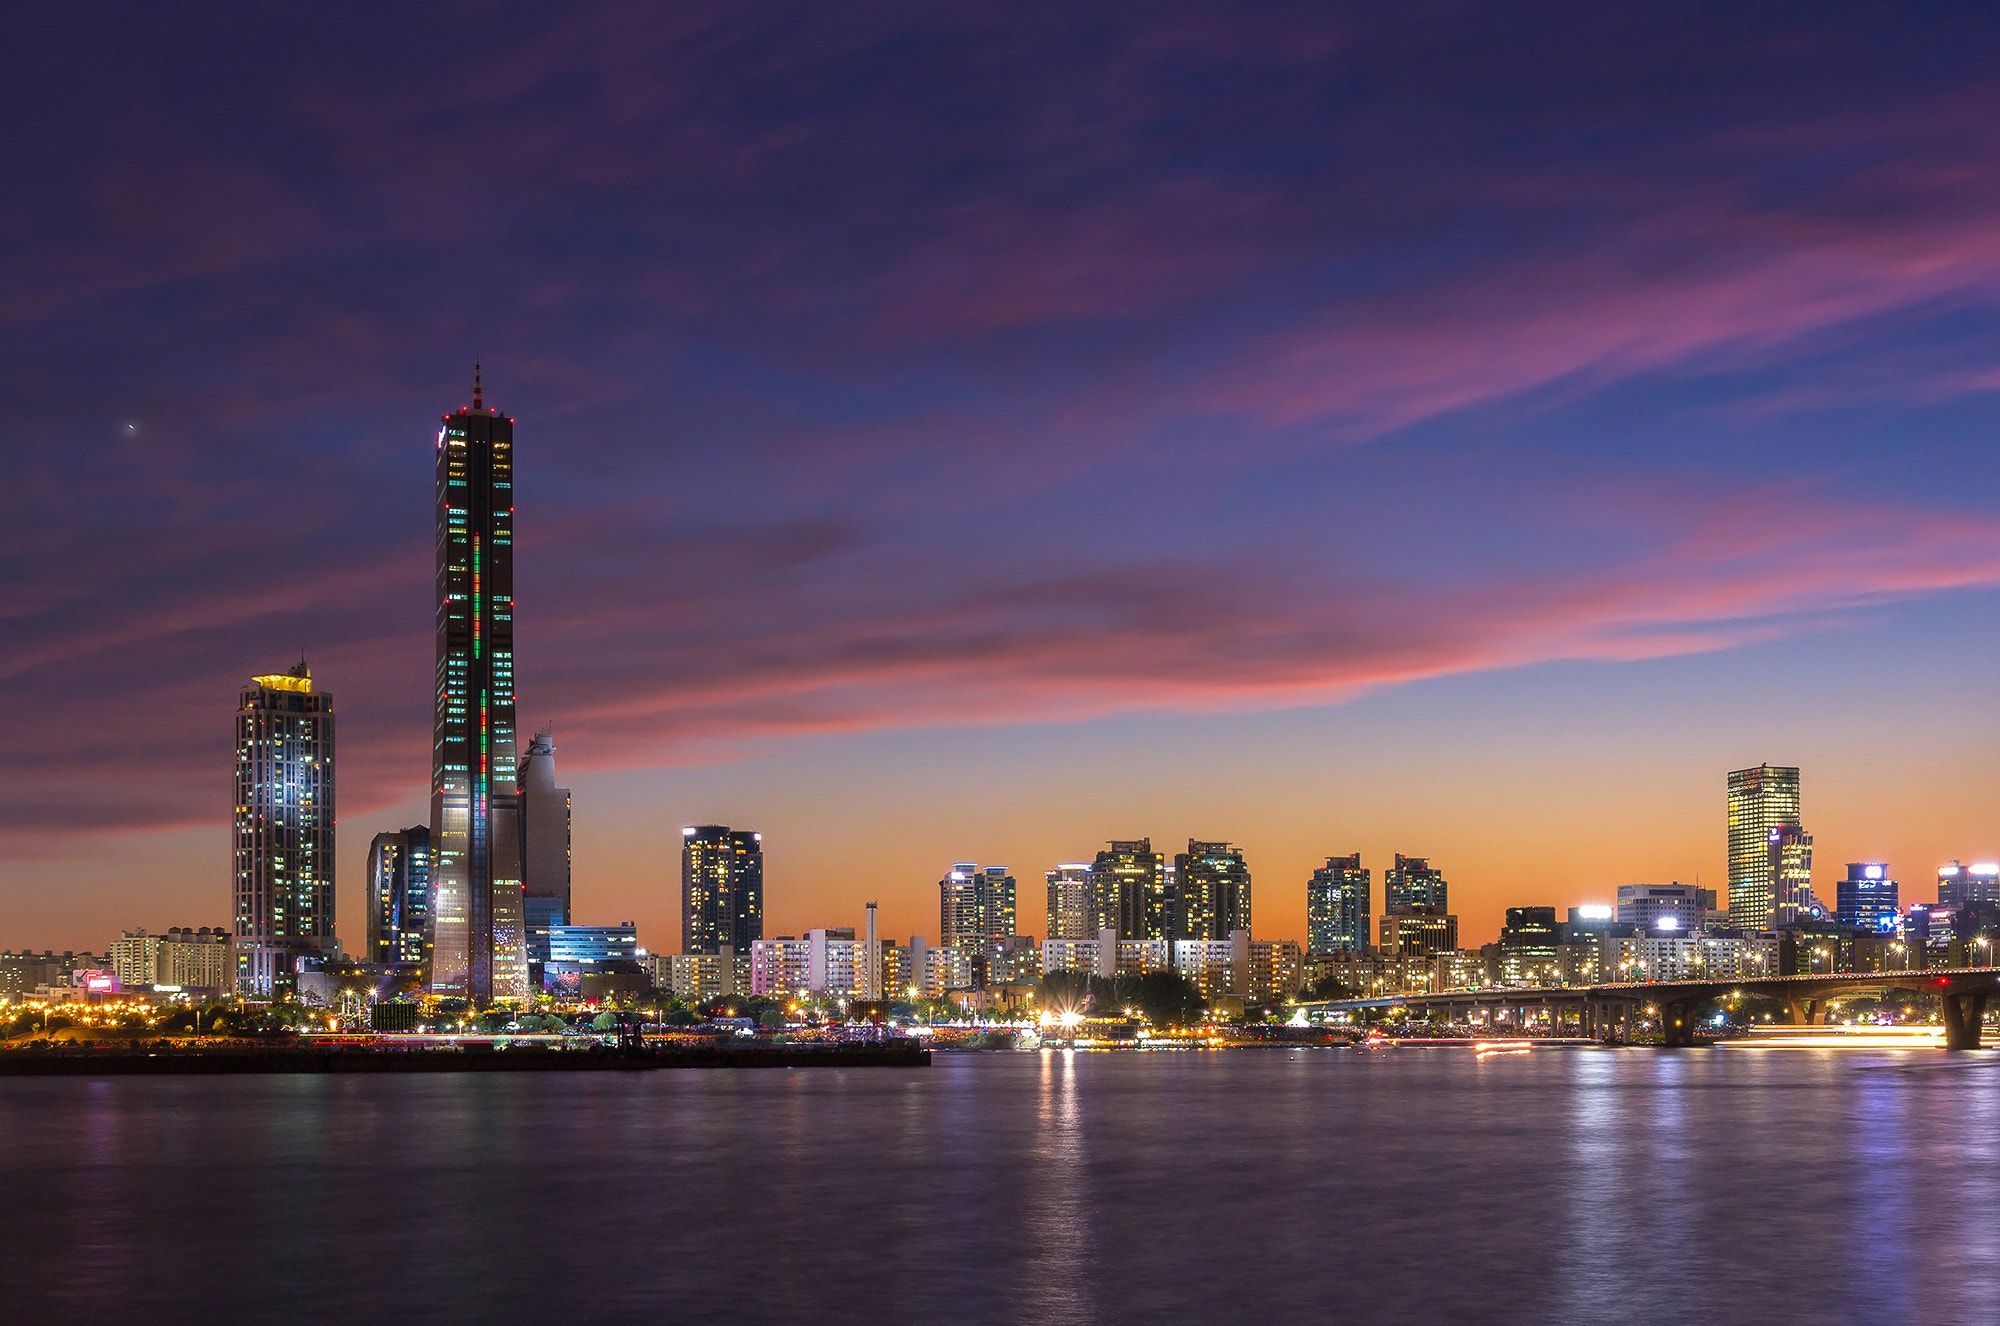 Yeouido after sunset City at Night and Han River, Yeouido, South Korea. Seoul skyline, Han river, Seoul